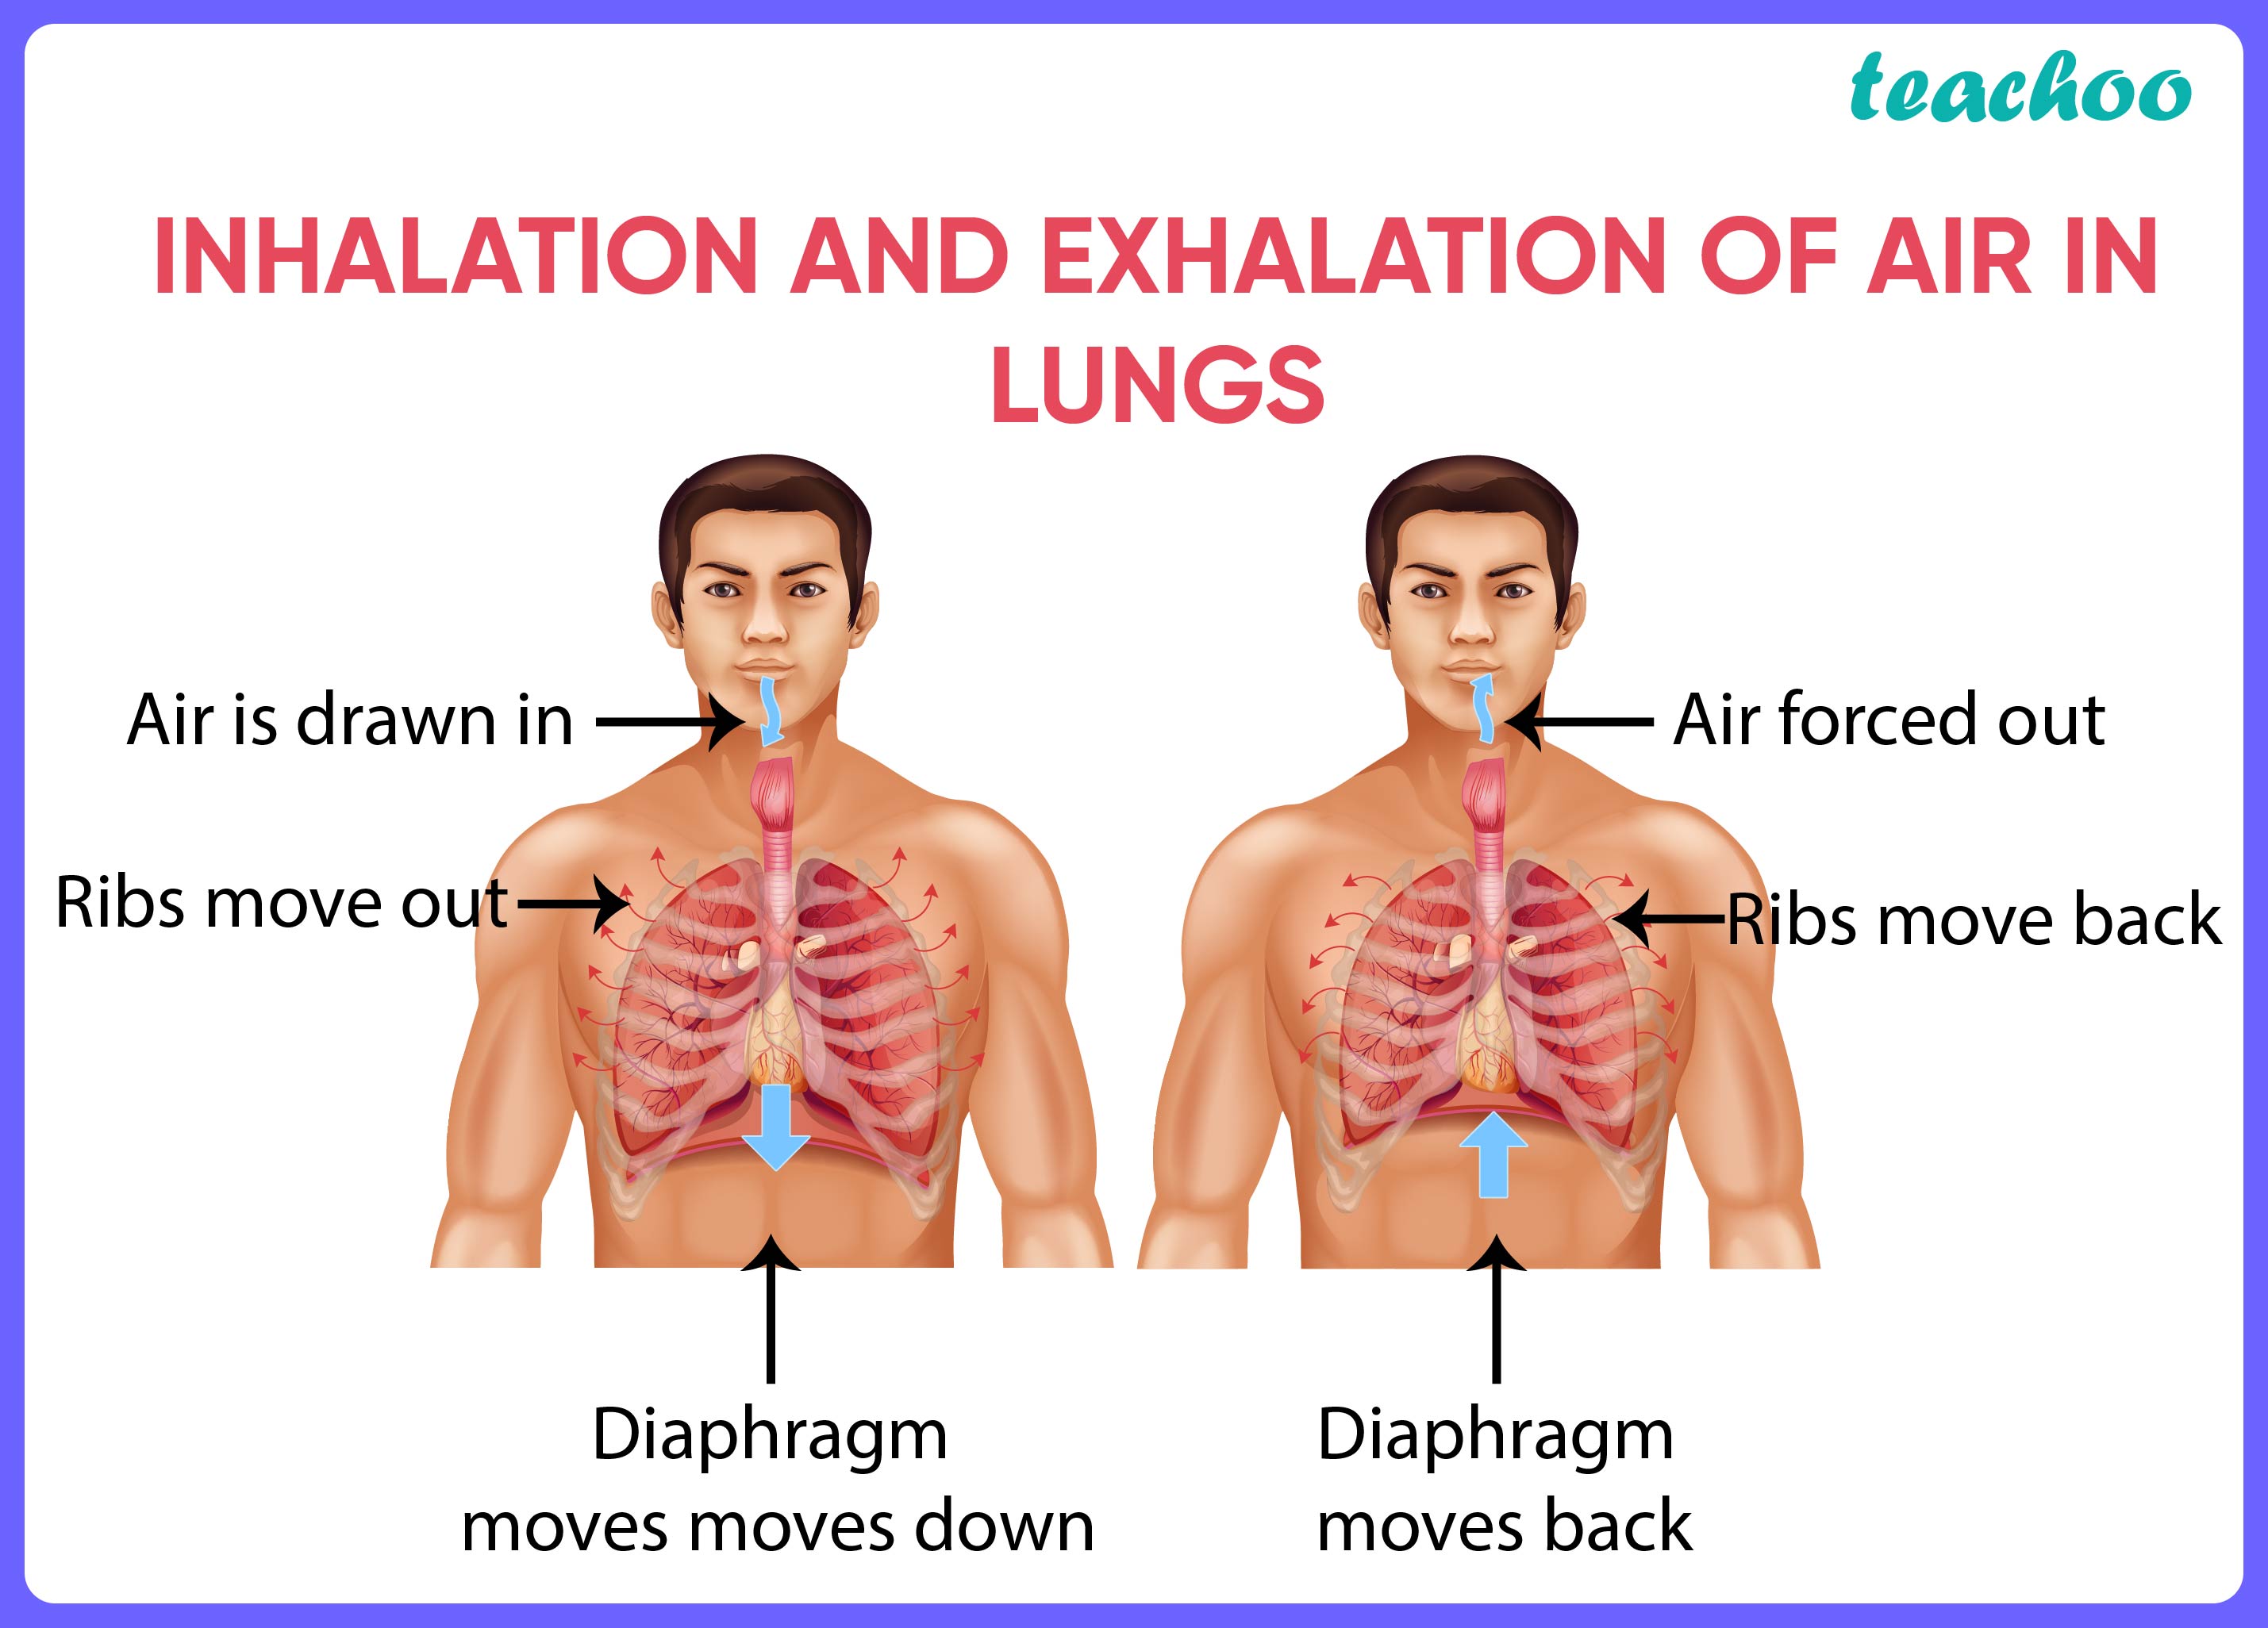 Inhalation And Exhalation Of Air In Lungs   Teachoo 